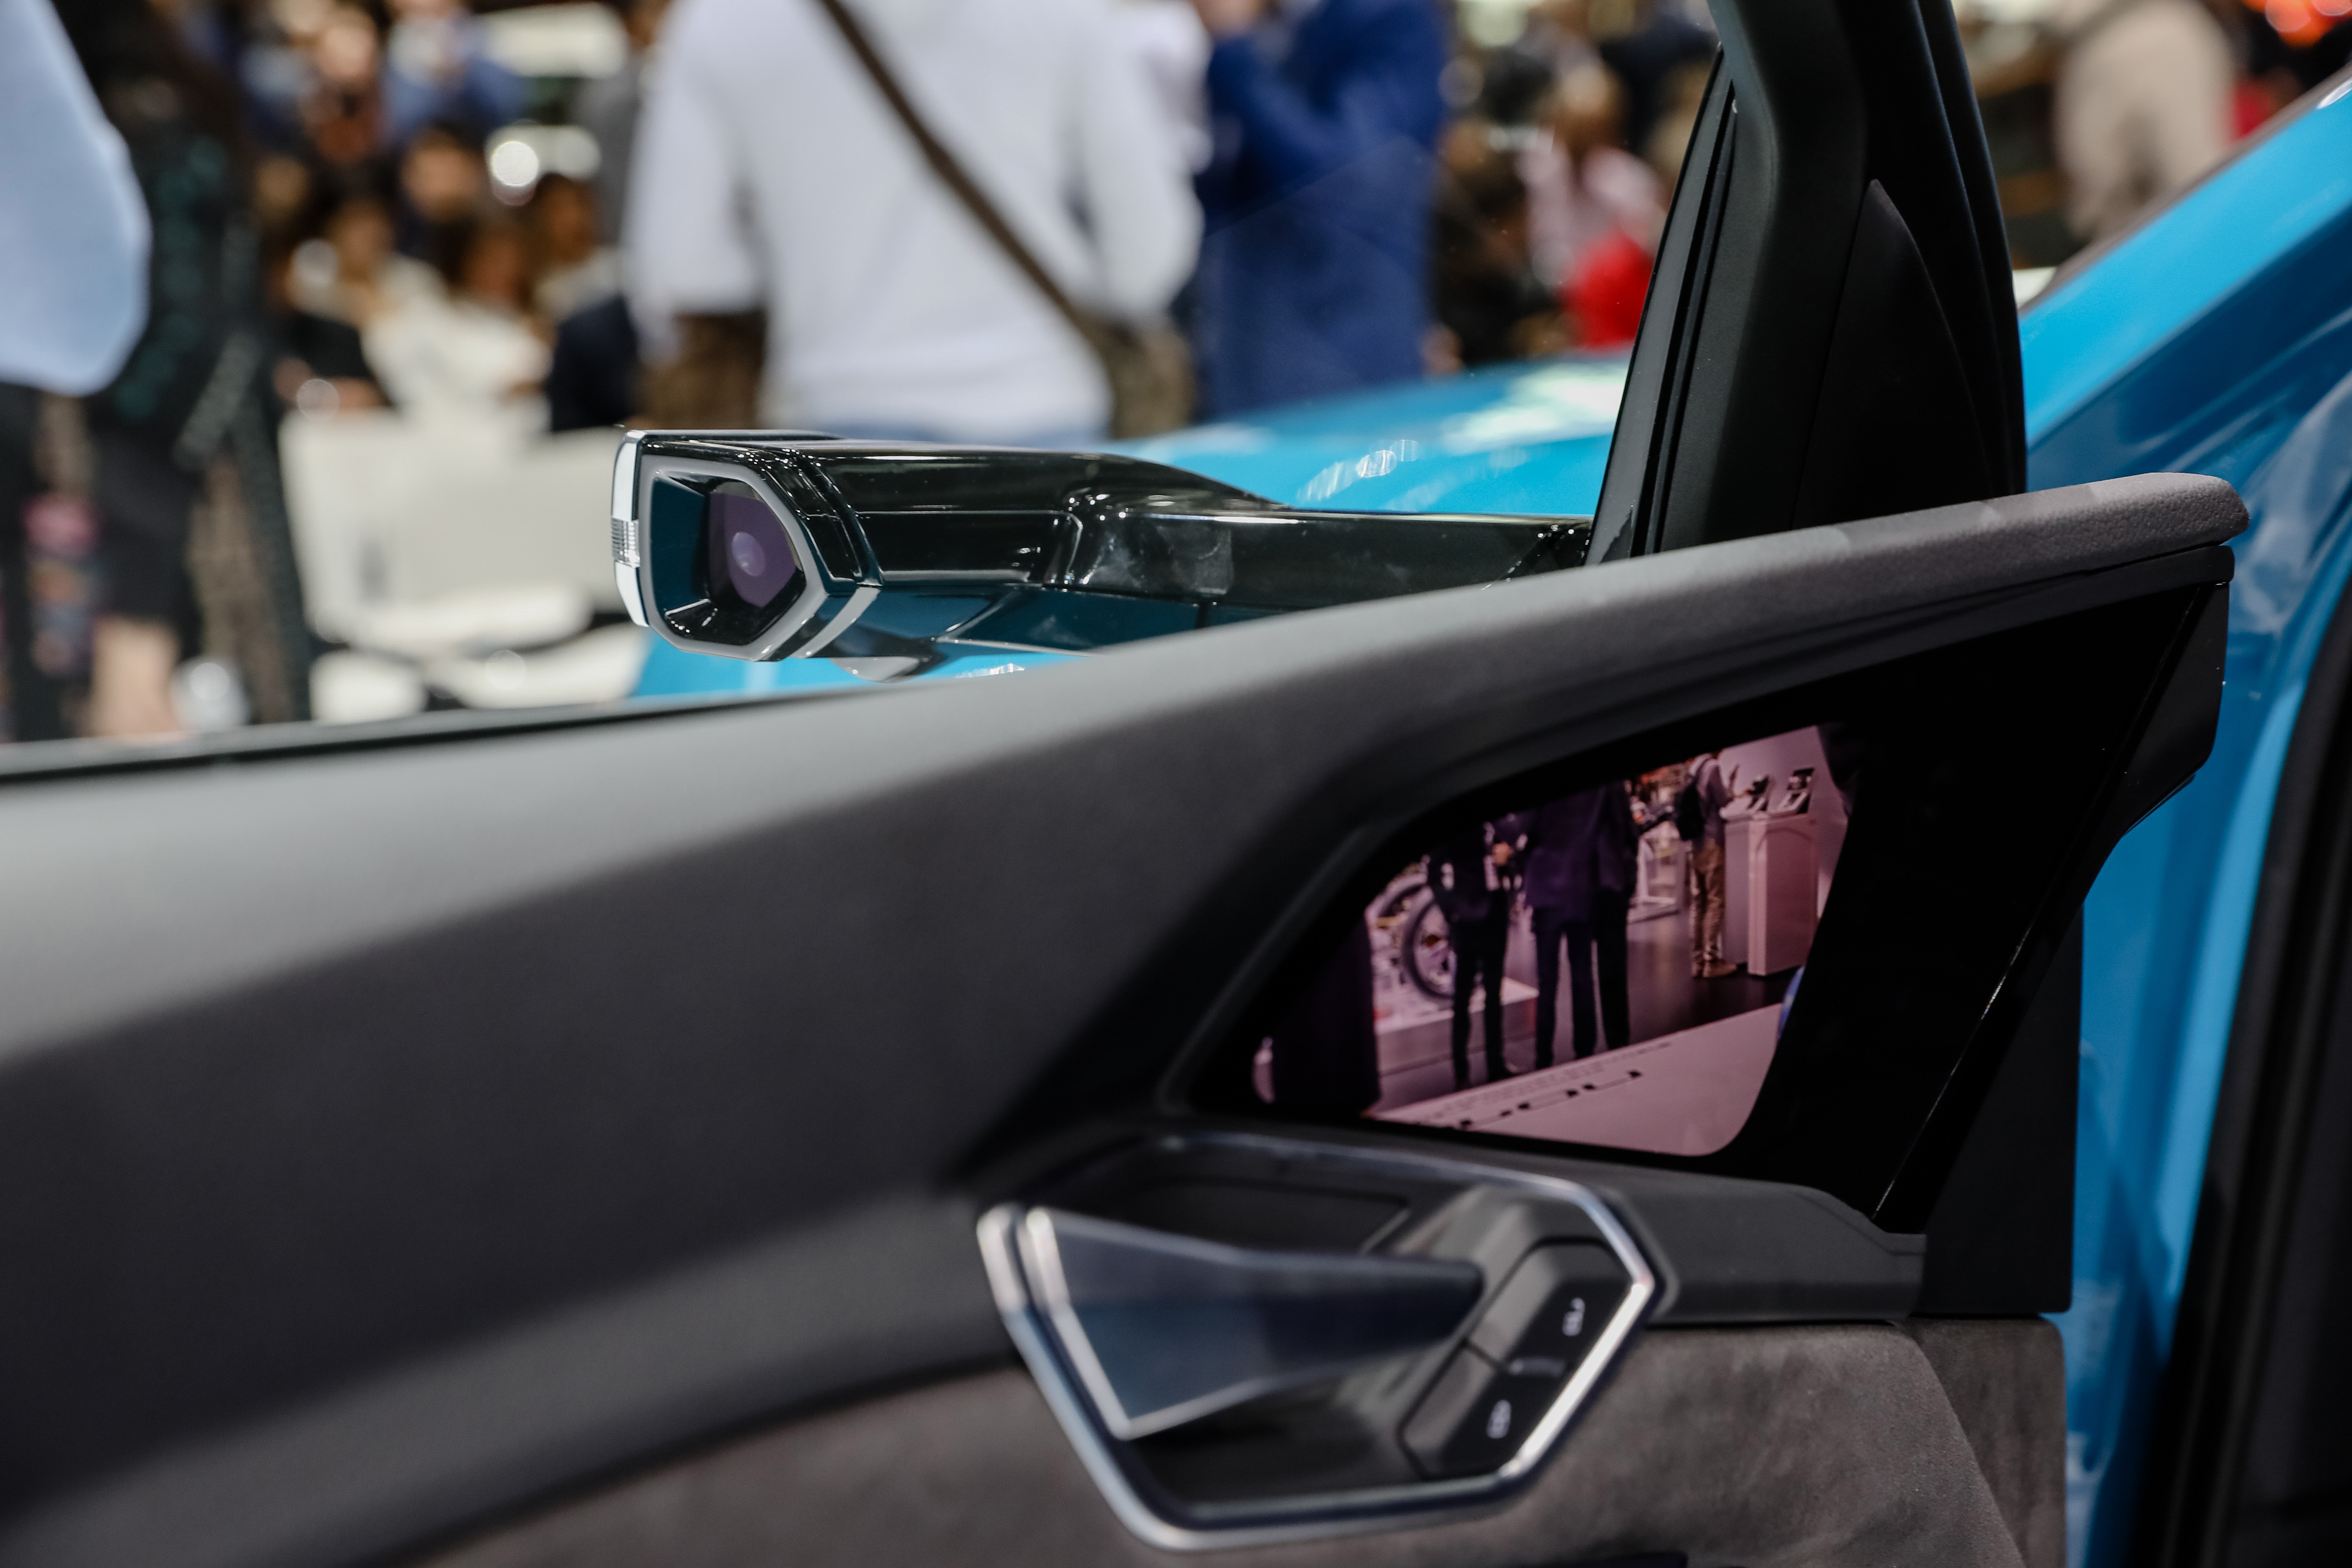 Should Cameras Replace Car Mirrors? U.S. Regulators Want to Know - Bloomberg